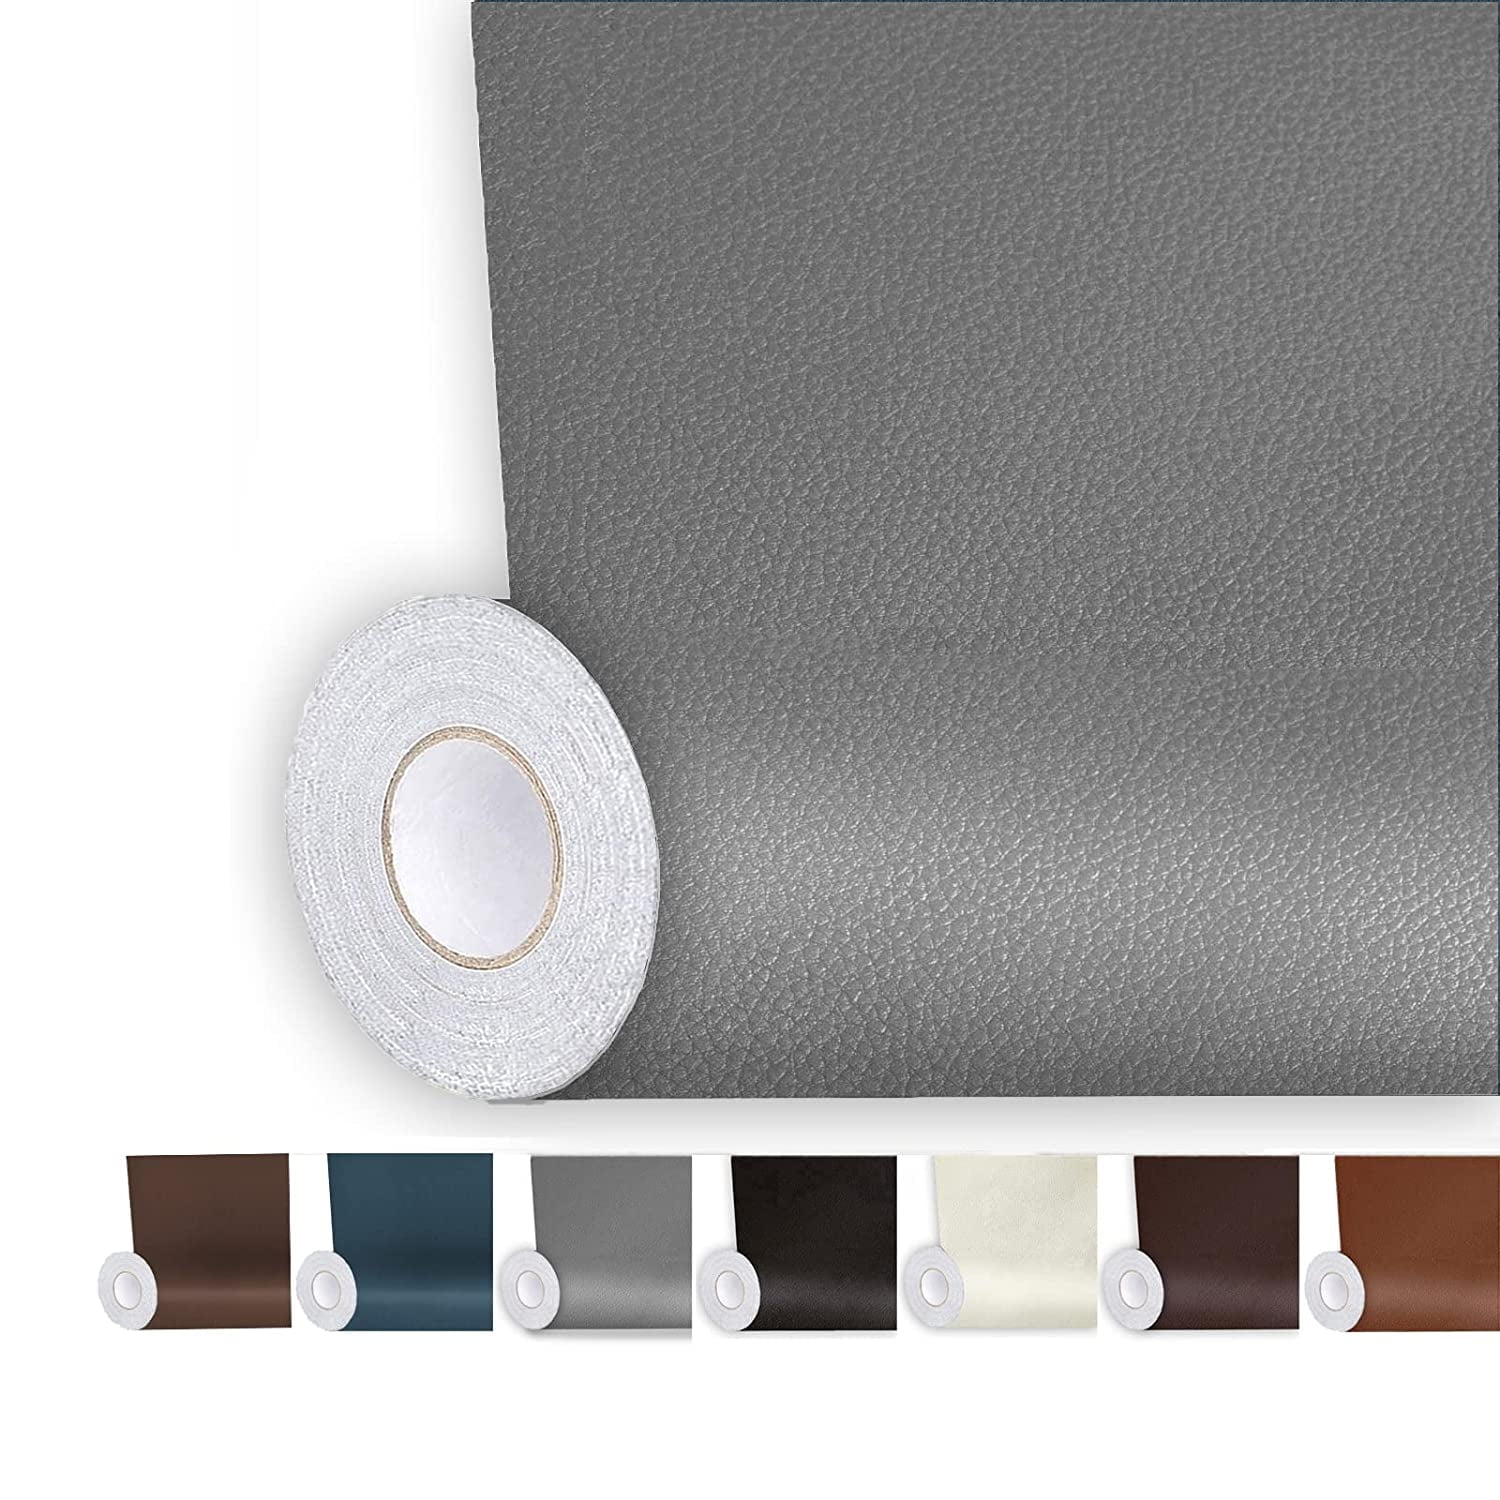 Large Leather Repair Patch Self Adhesive,16×63 inch Large Leather